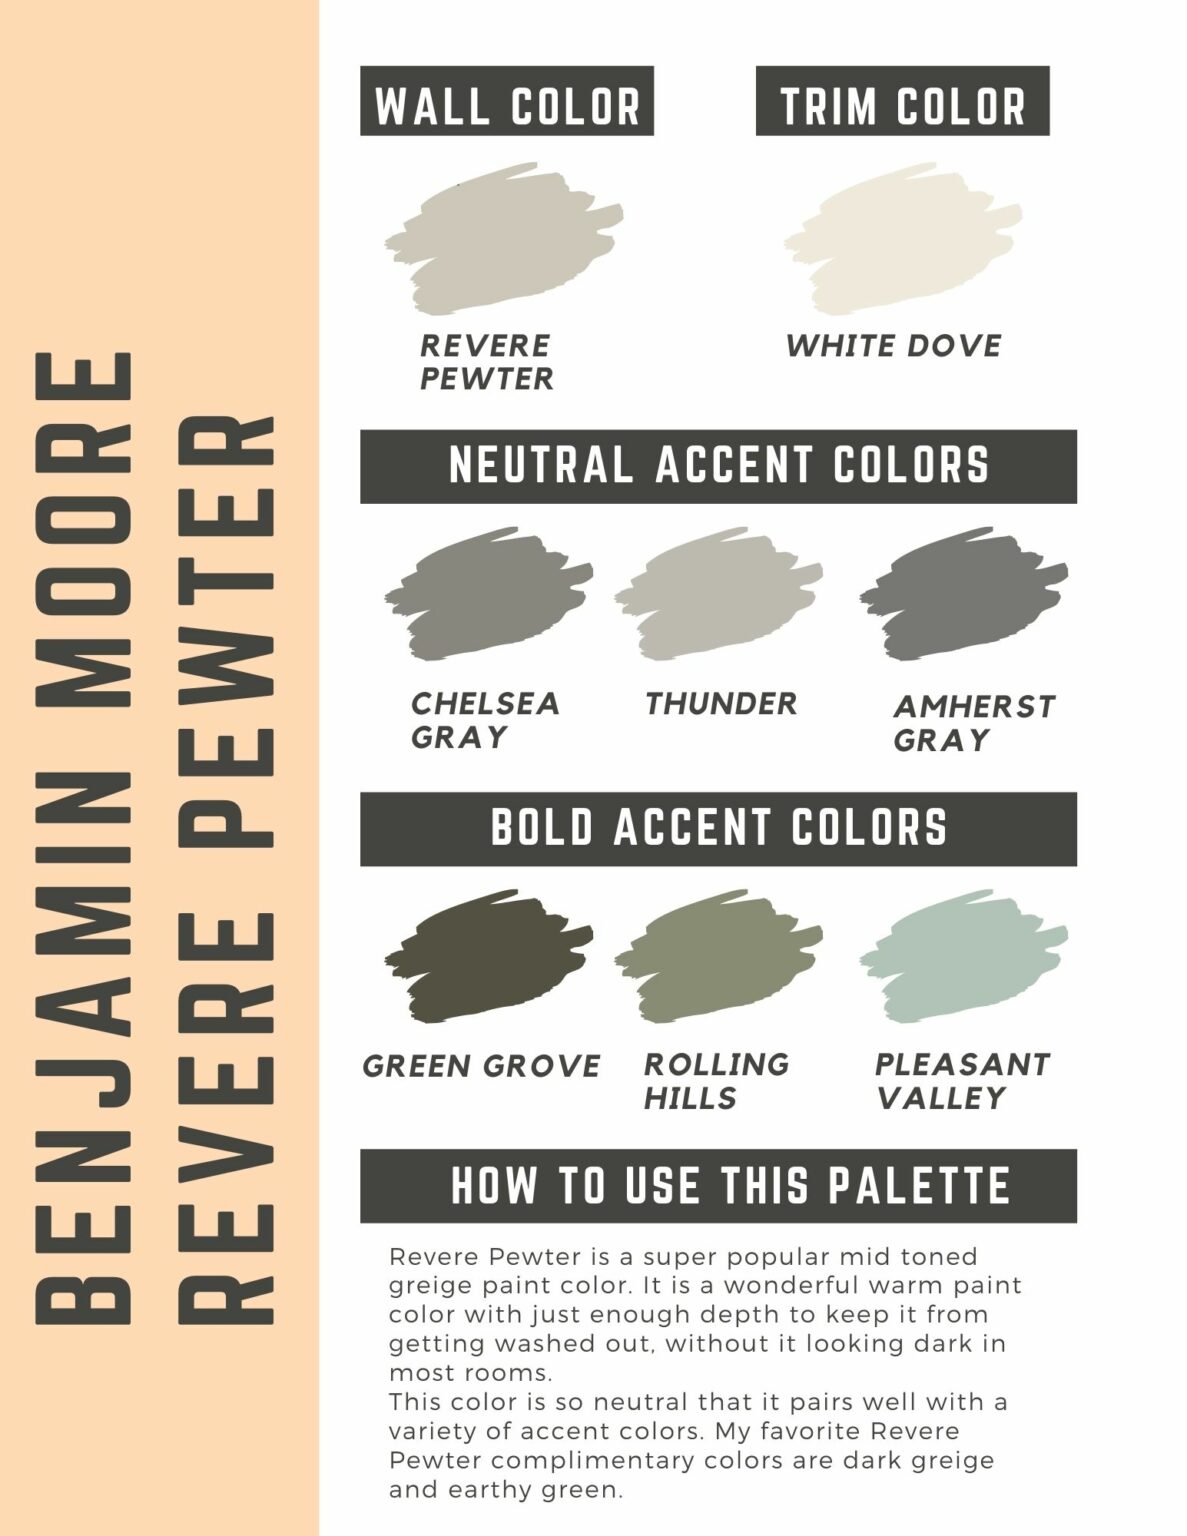 Benjamin Moore Revere Pewter: a complete color review - The Paint Color ...